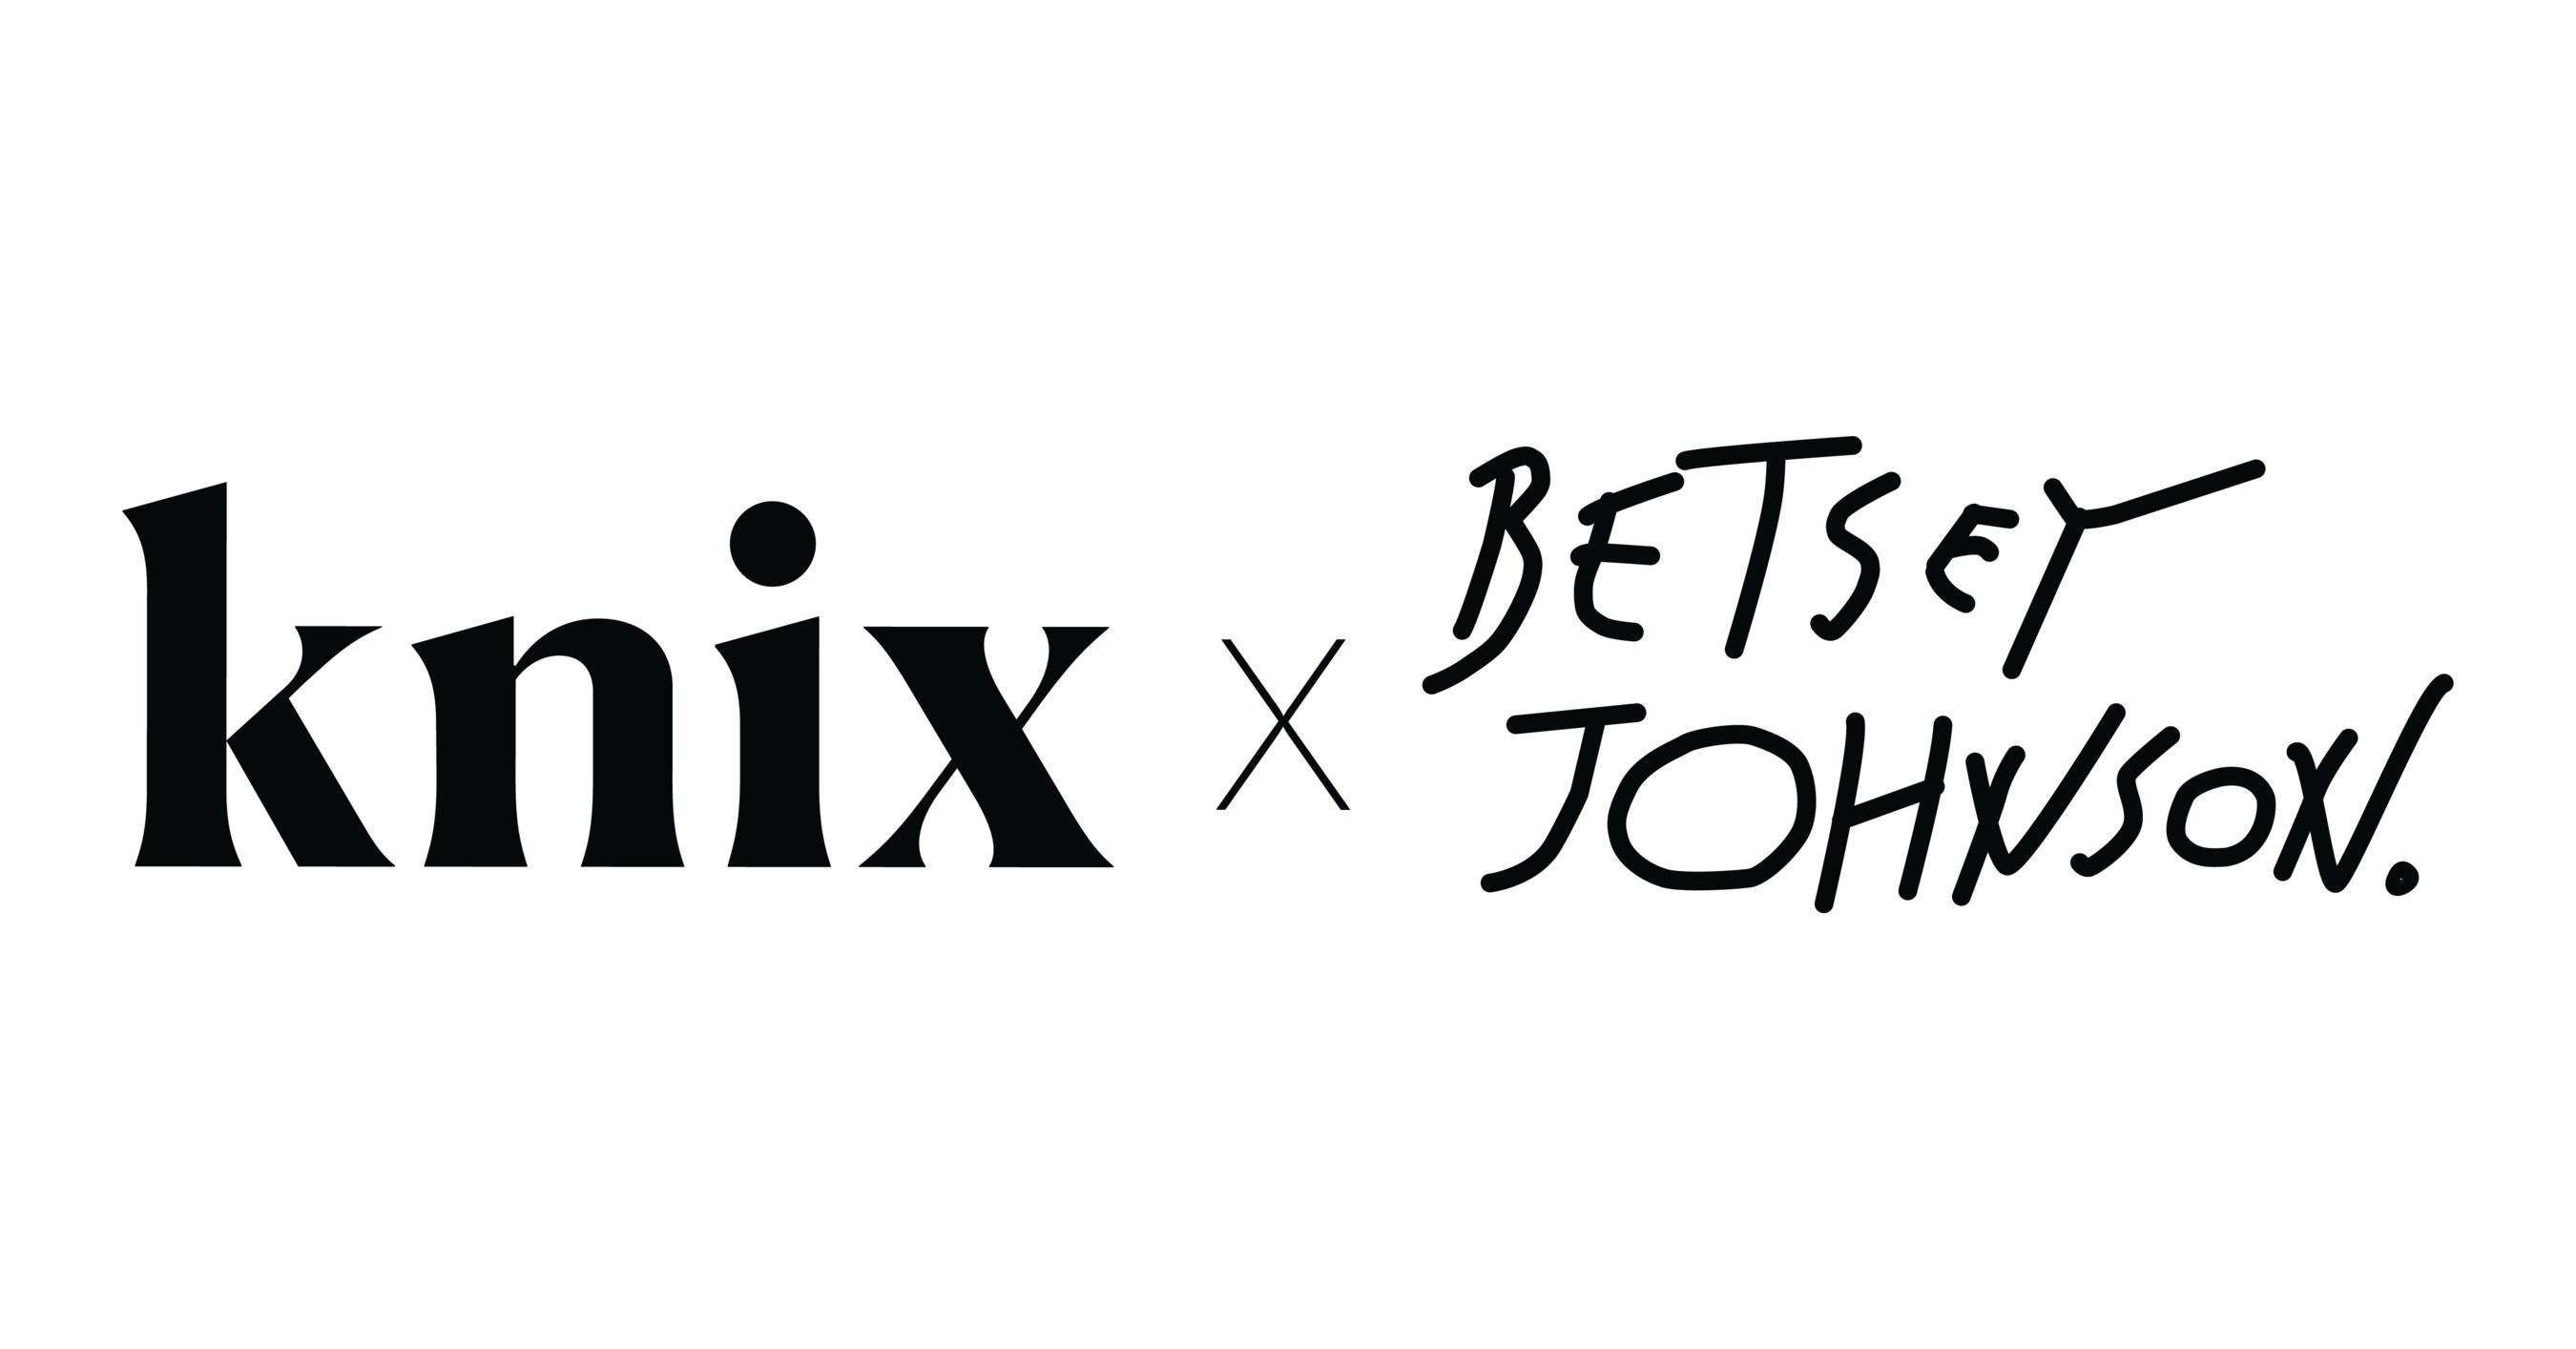 Betsey Johnson Designed a Knix Underwear Collection